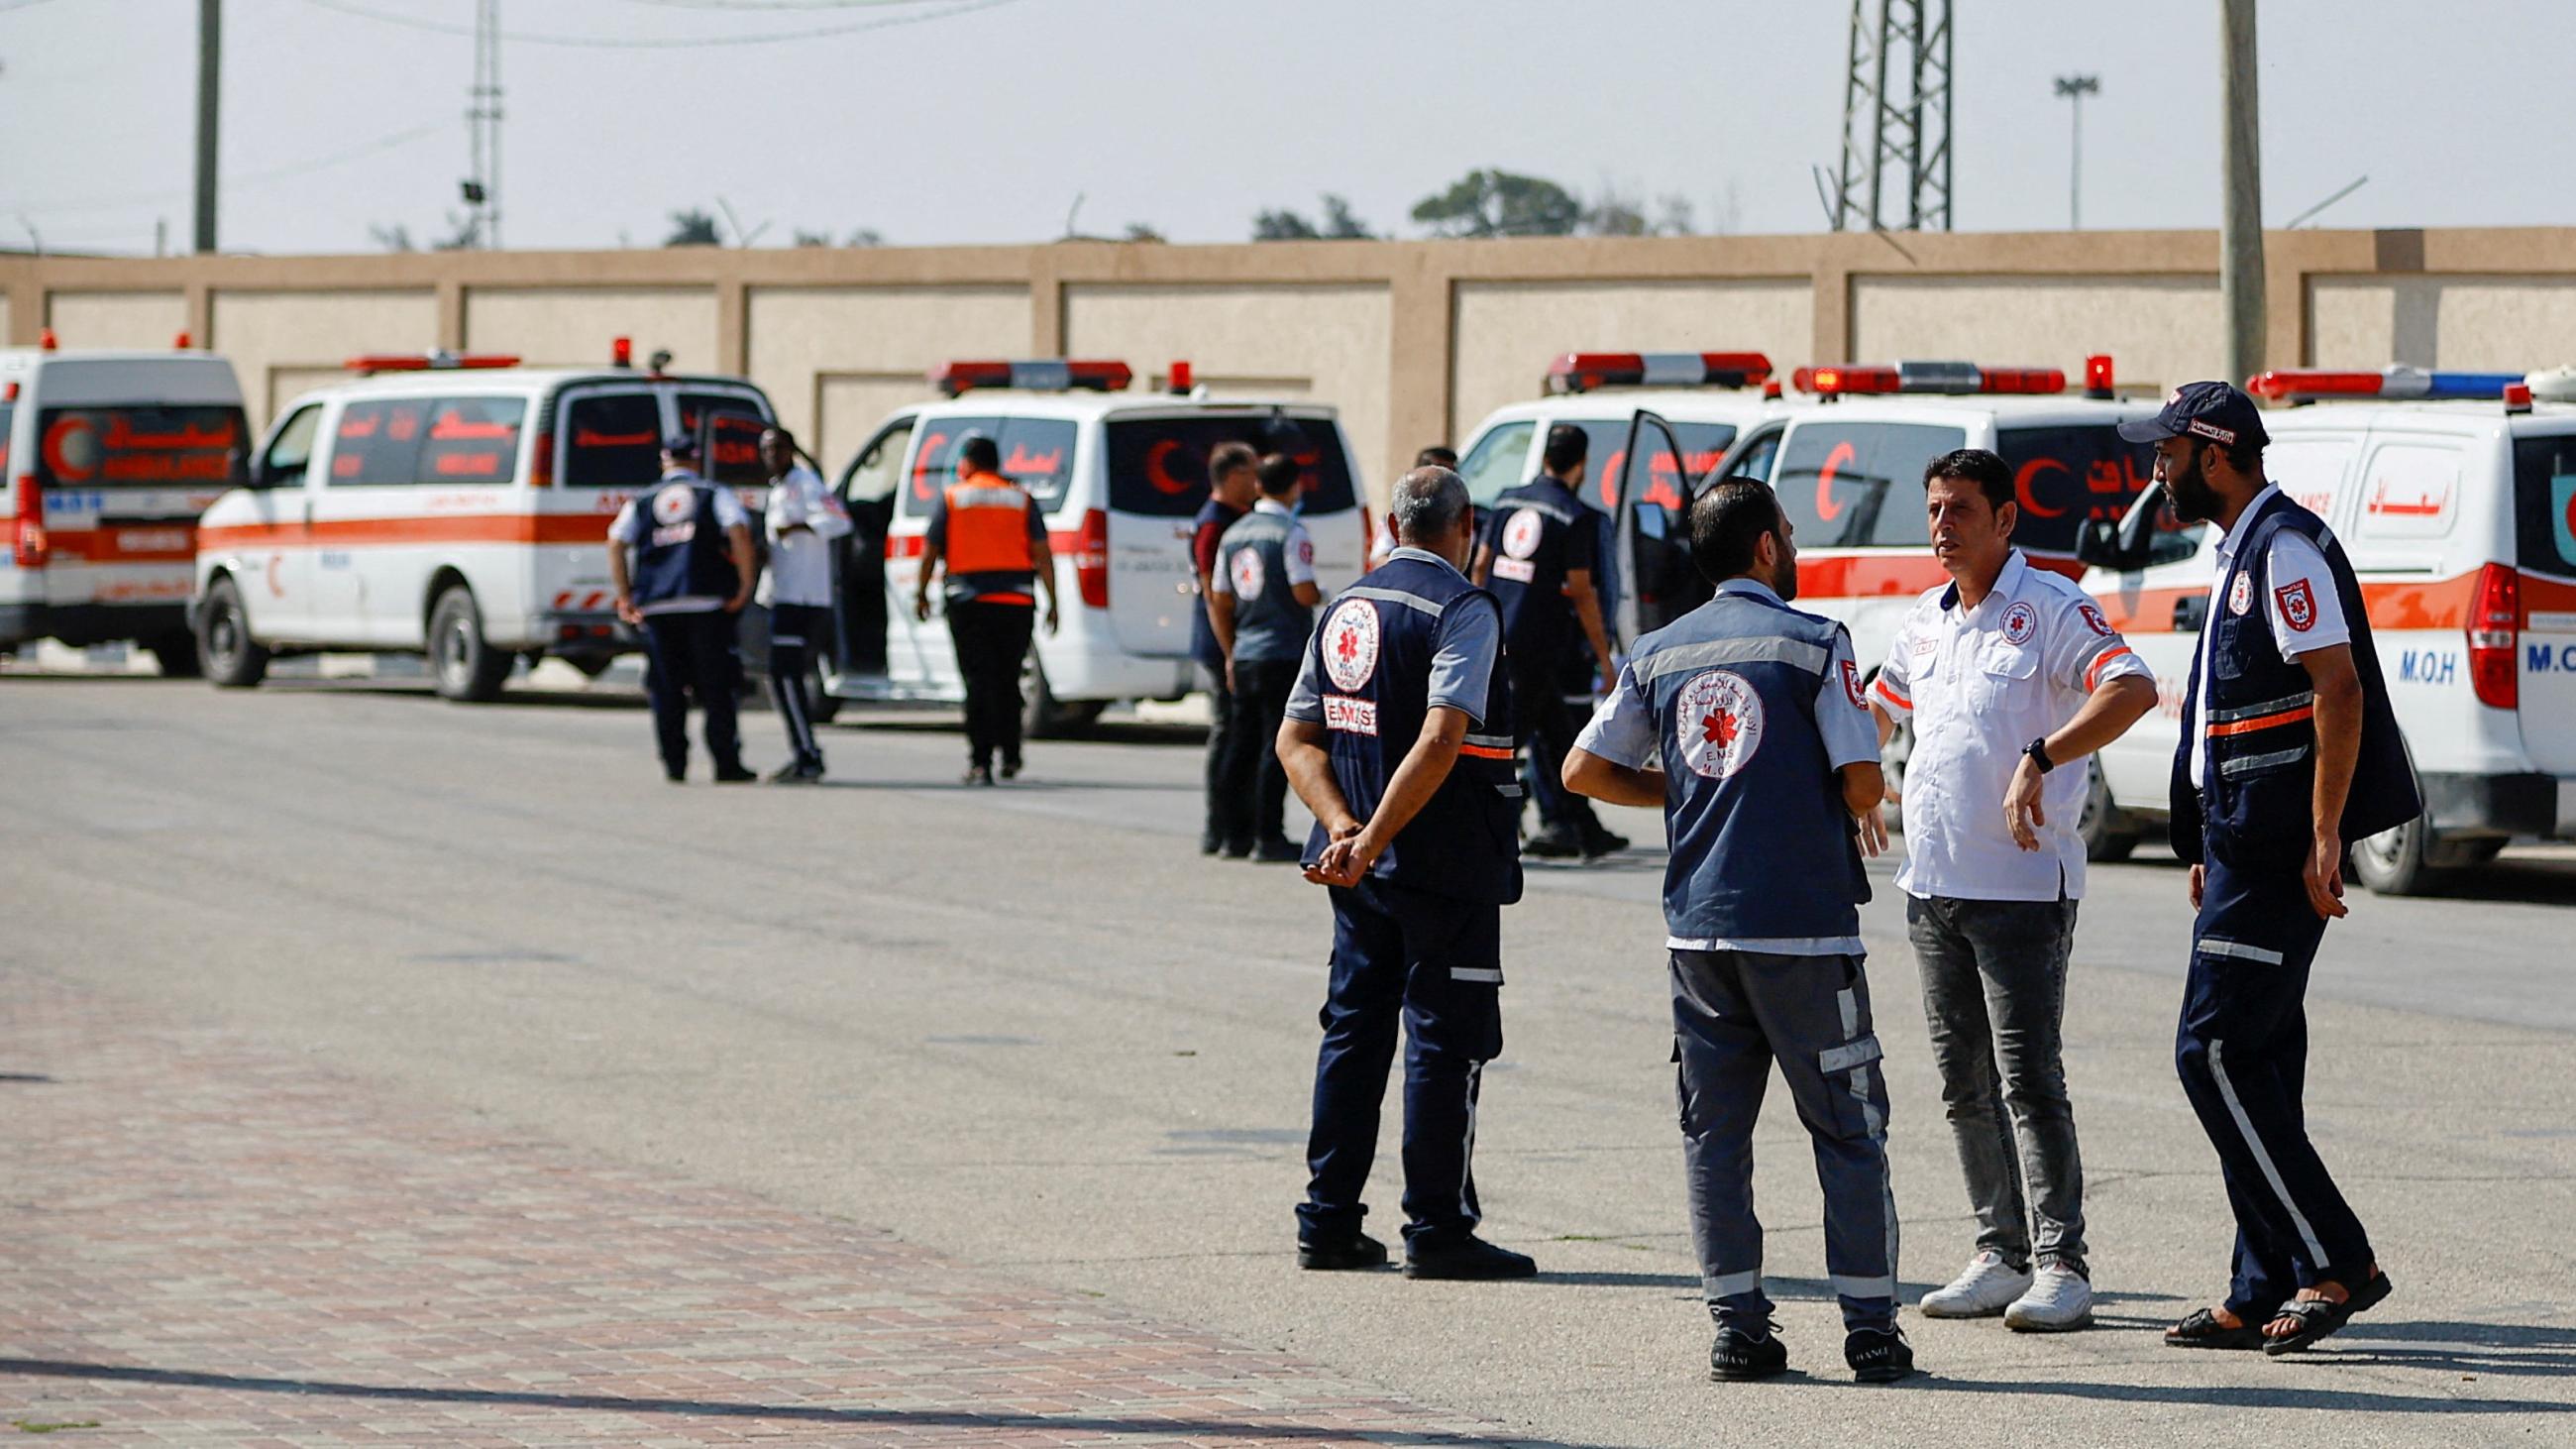 A group of men is seen standing beside a line of ambulances 